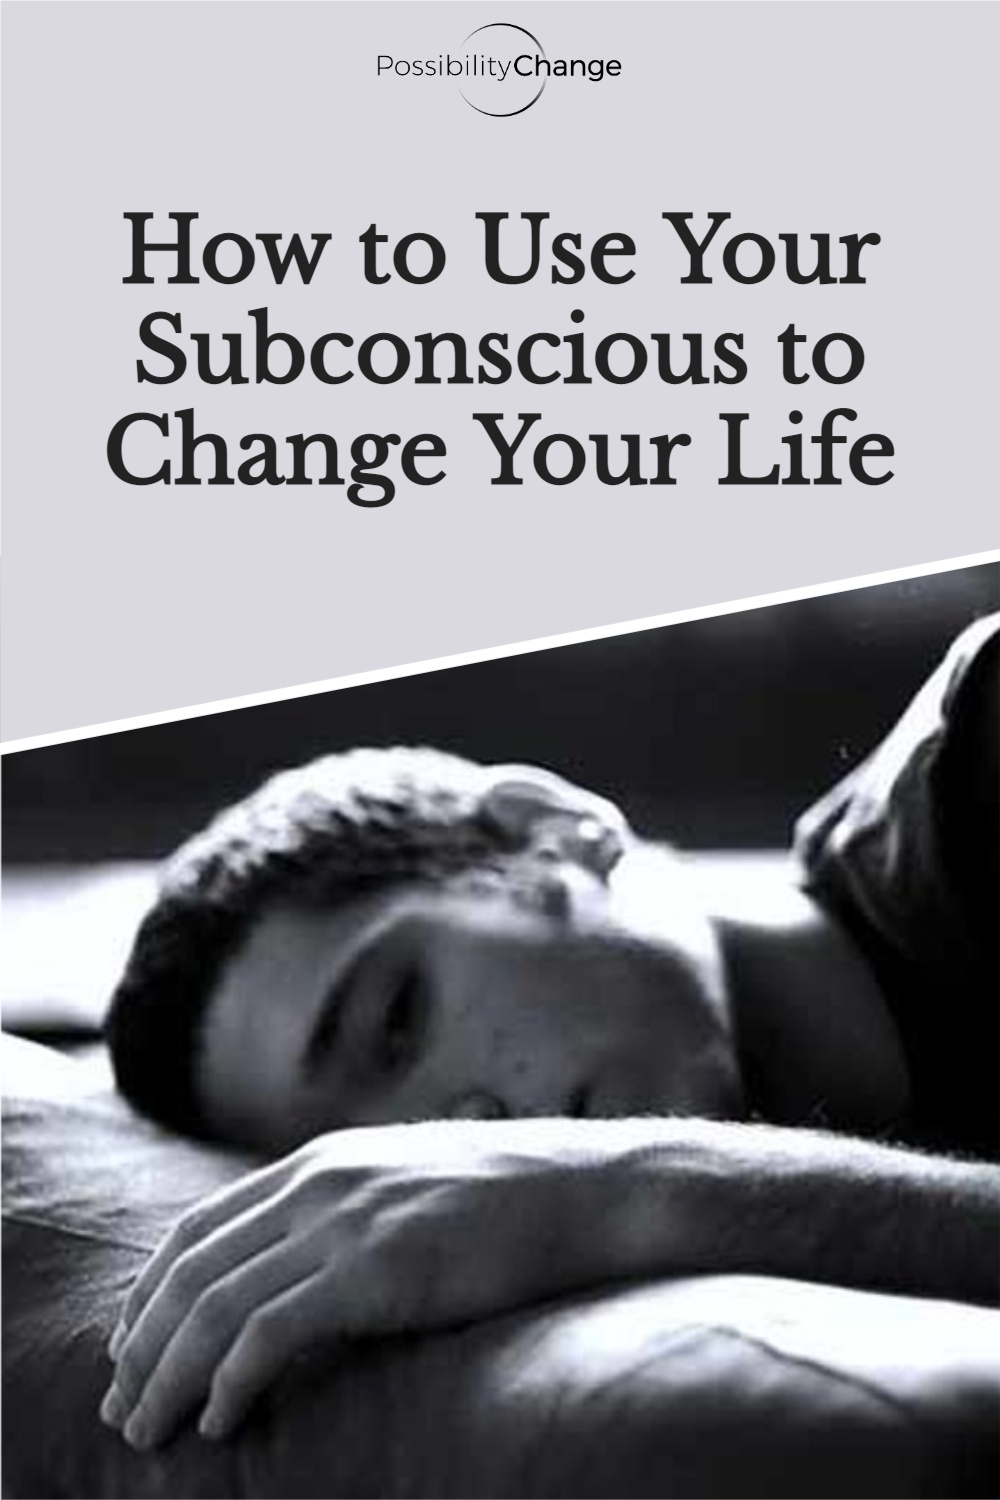 How to Use Your Subconscious to Change Your Life